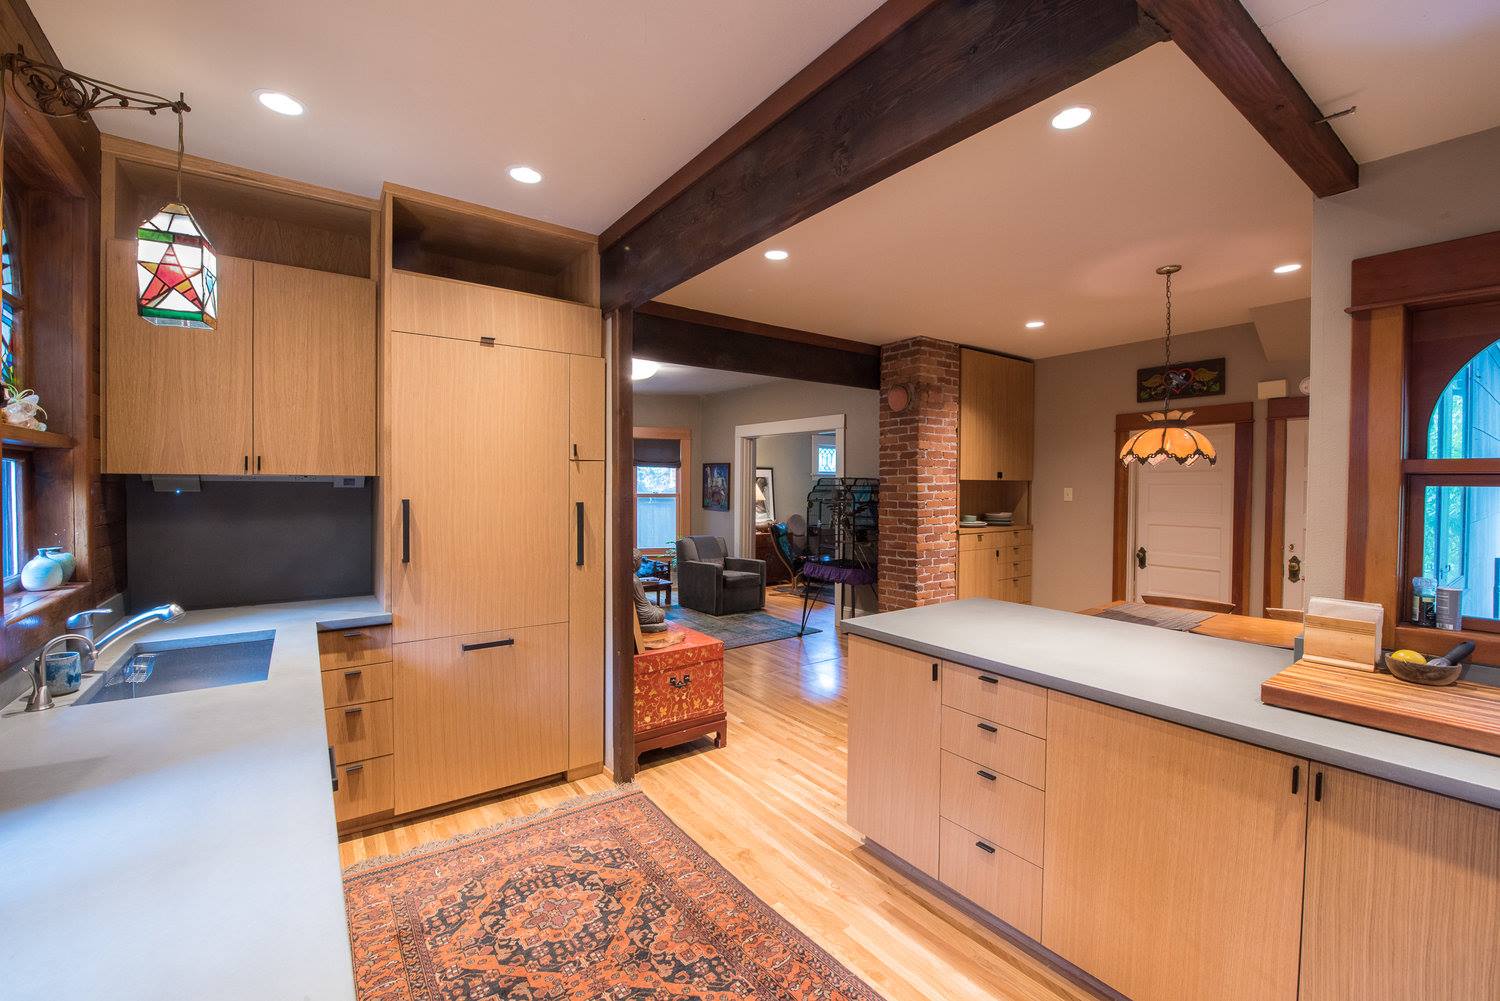 A kitchen with wooden cabinets and a rug on the floor.